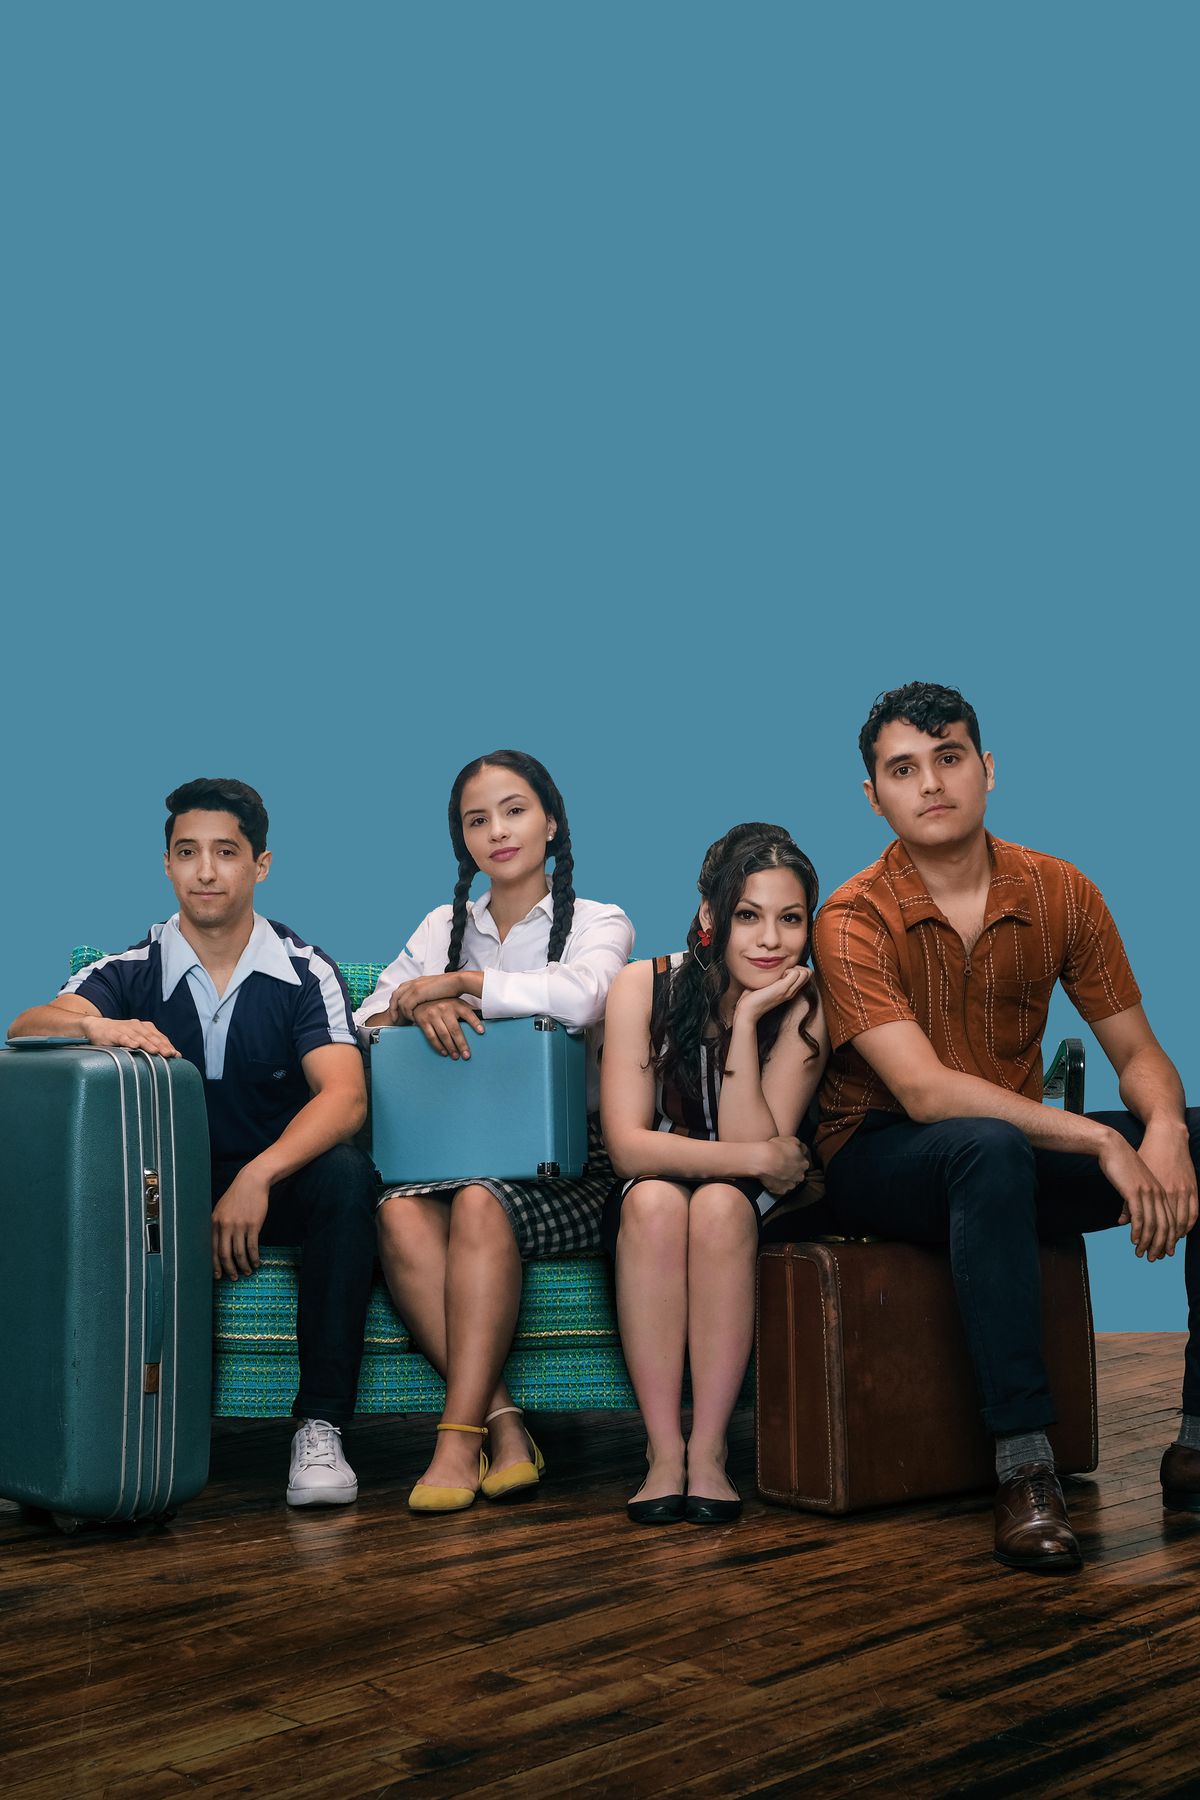 Meet the Morales siblings — Bobby (Joaquin Rodarte from left), Betty (Janyce Caraballo), Gina (Ayssette Muñoz) and Johnny (Nick Mayes) — members of a Mexican-American family in ‘60s America in Teatro Vista’s Midwest premiere of “Hope: Part II of A Mexican